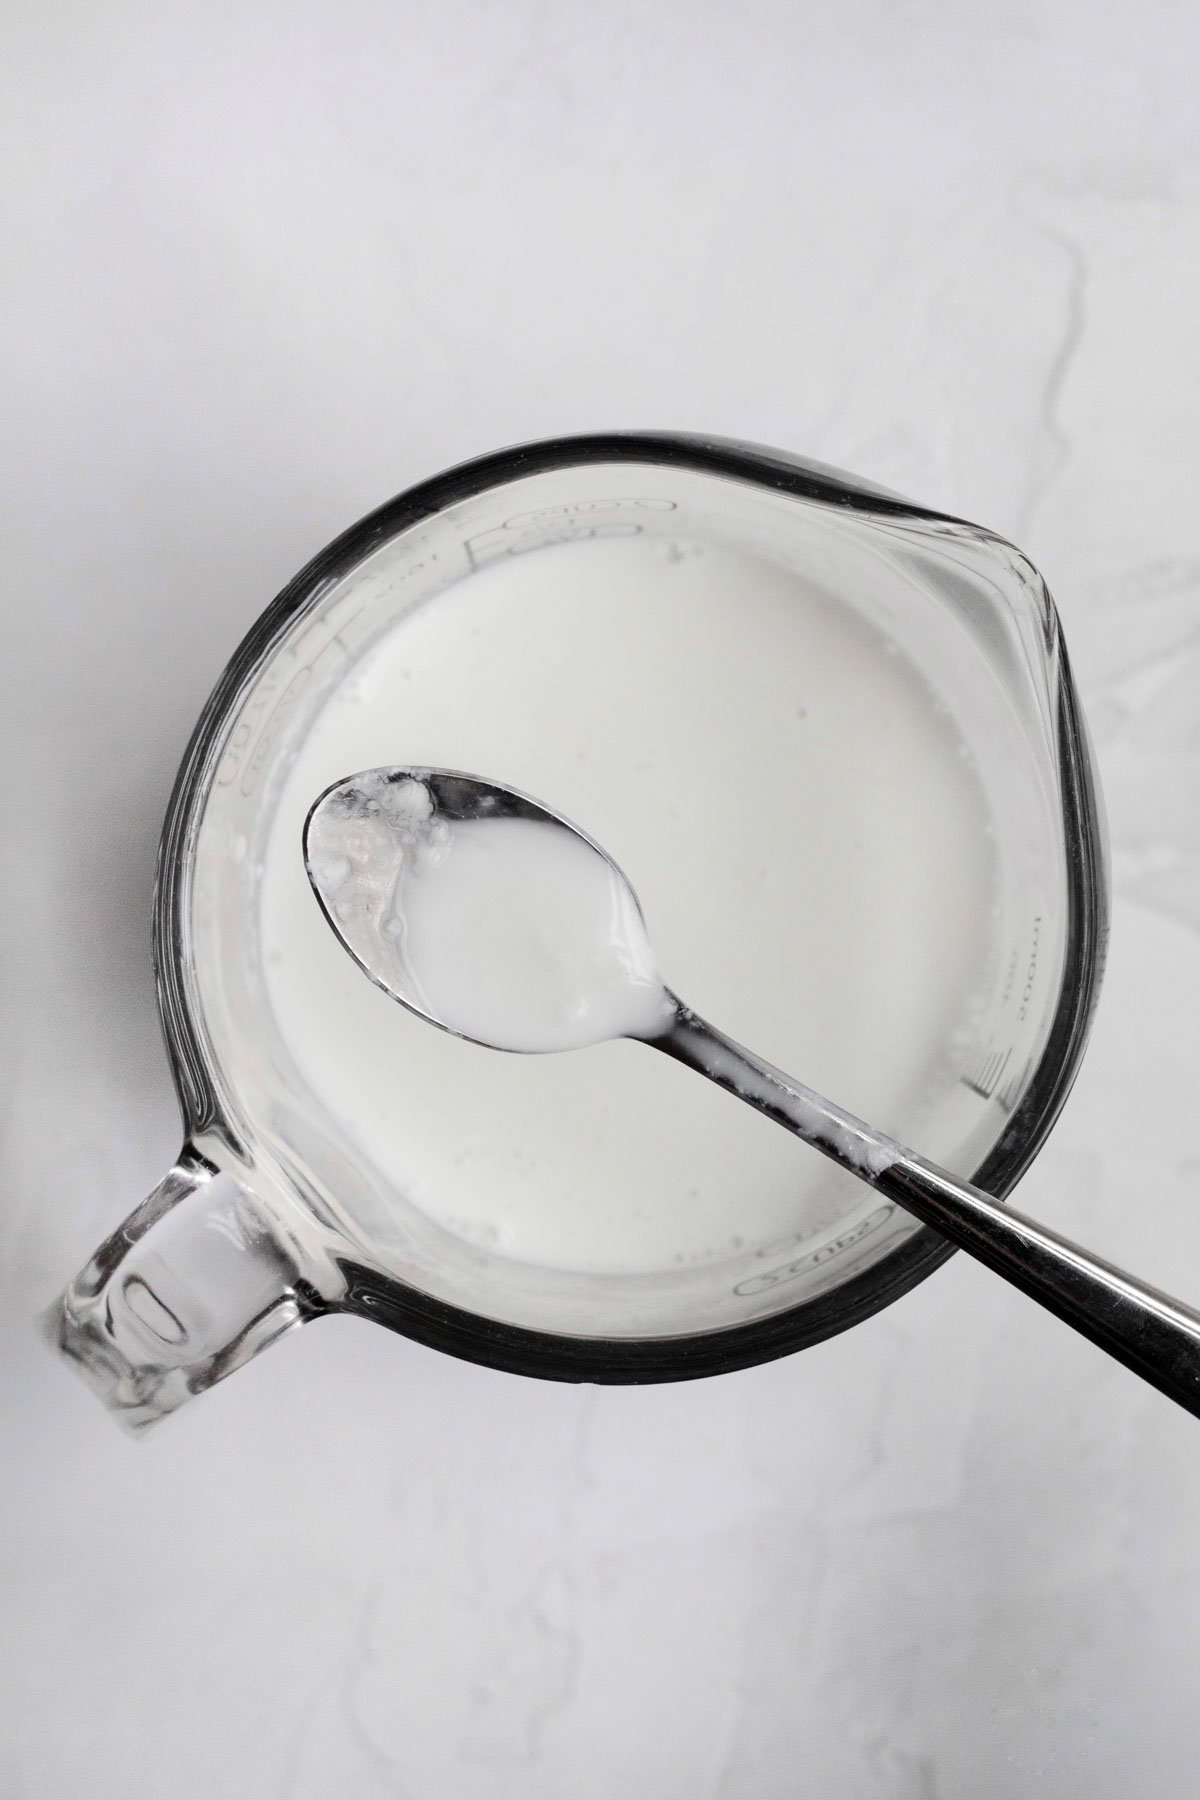 Homemade buttermilk in a measuring cup with a spoon.